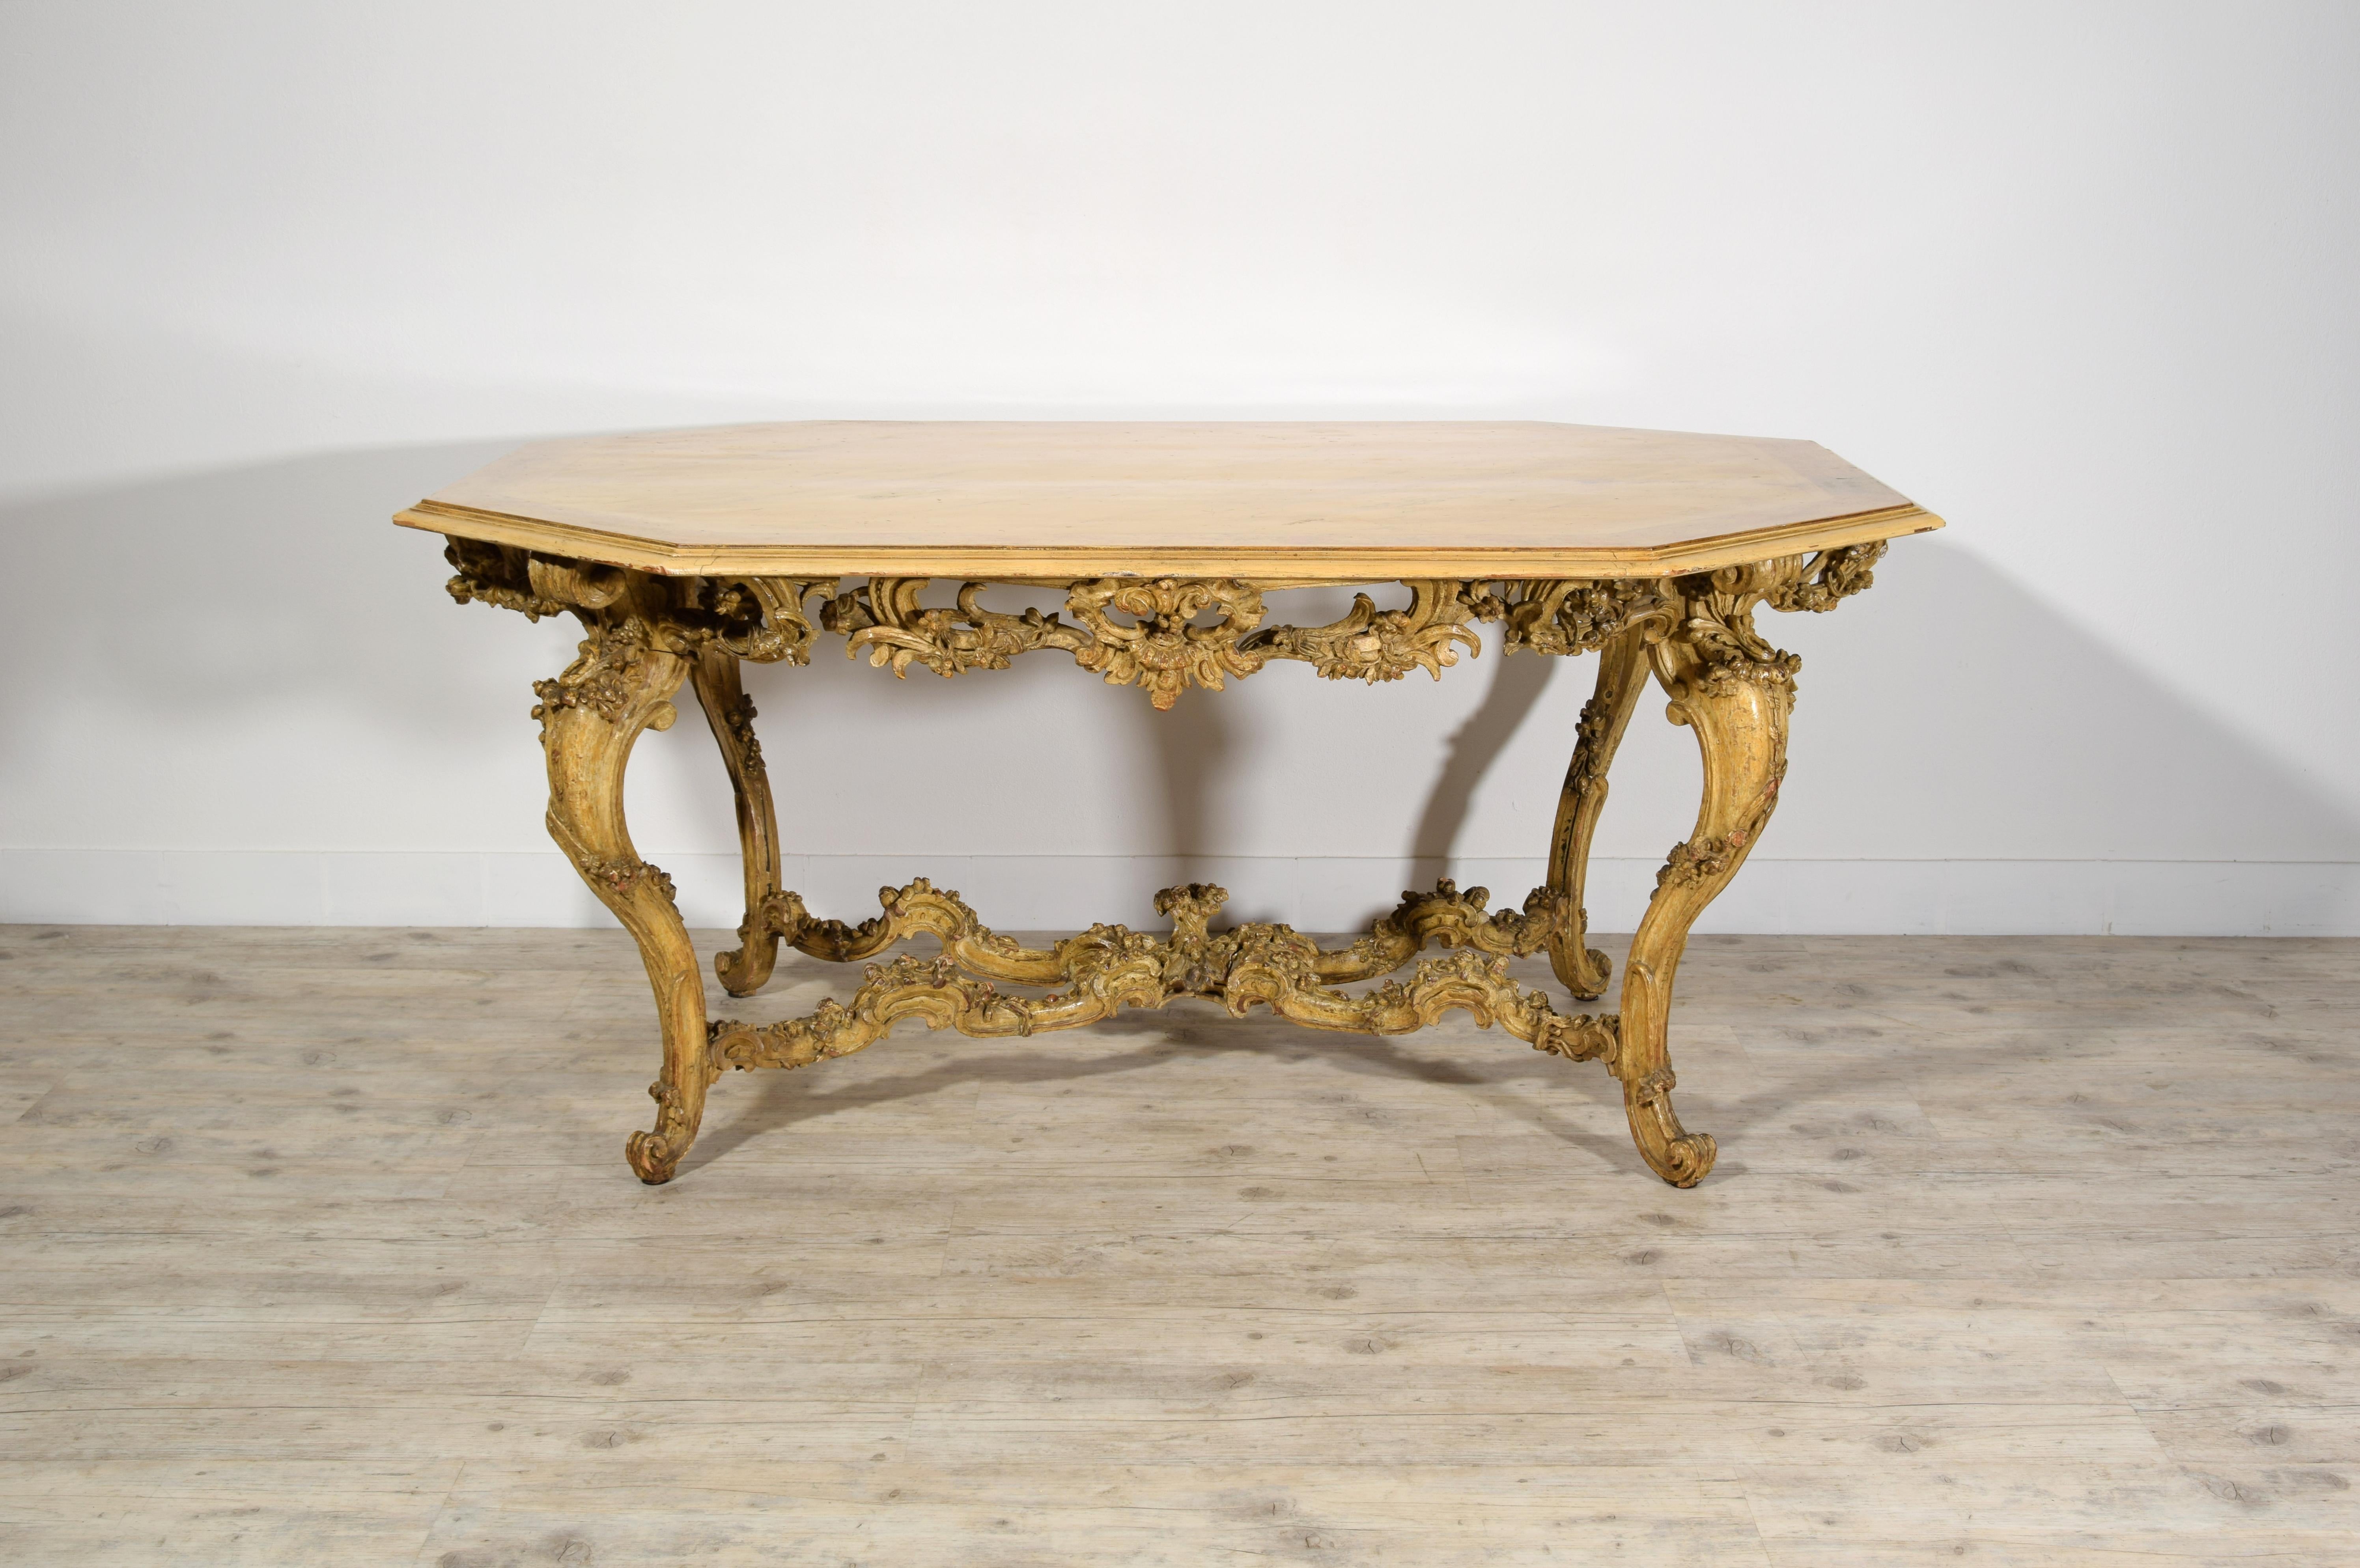 Italian Baroque Carved Gilt and Lacquered Wood Center Table, 18th Century For Sale 3